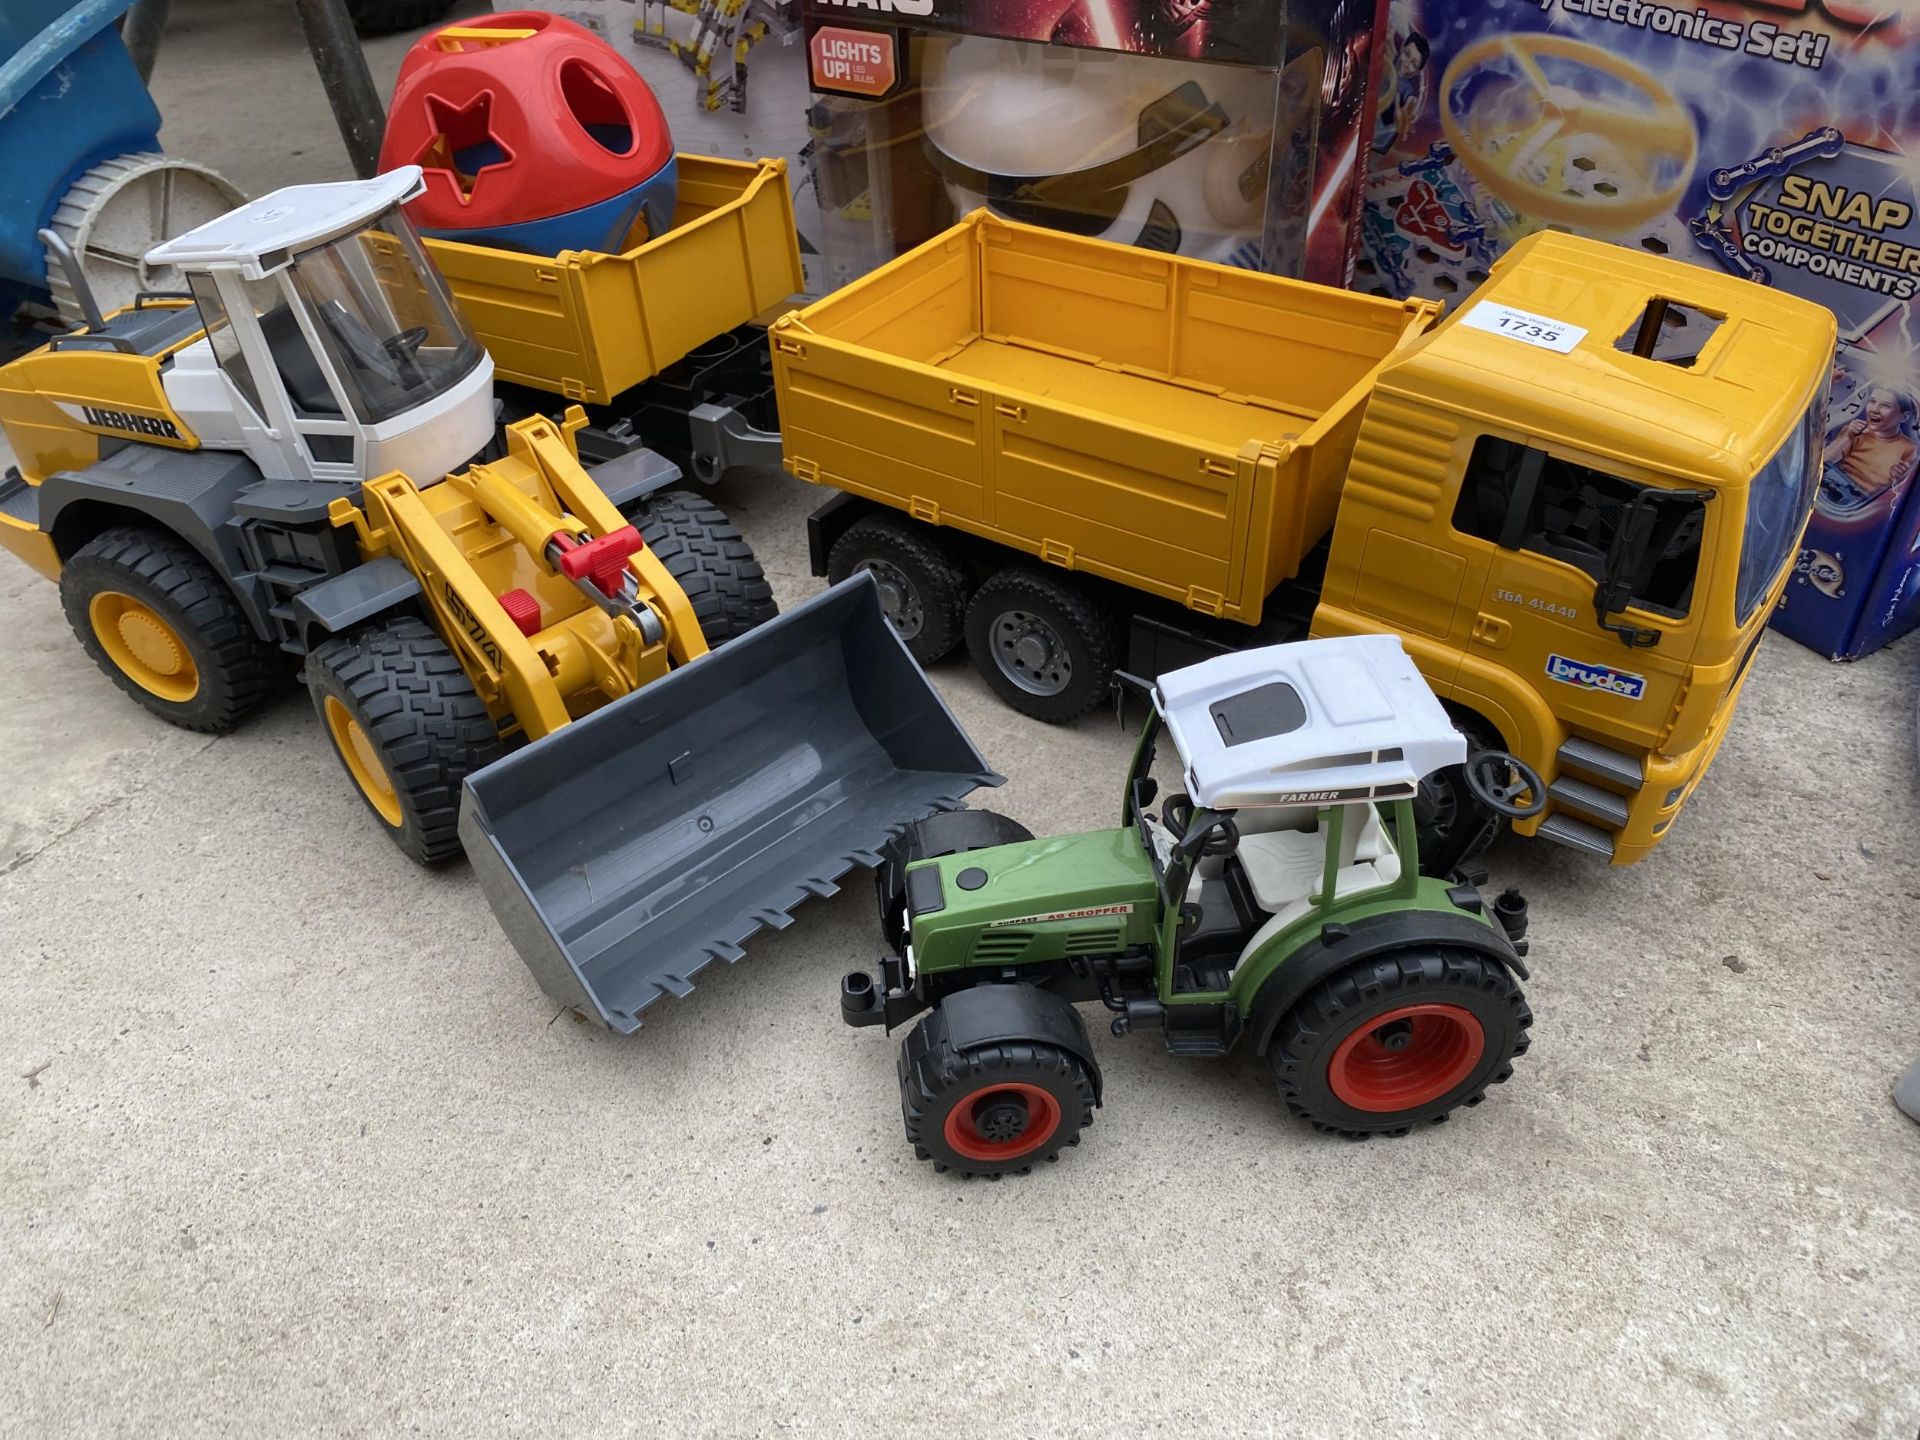 AN ASSORTMENT OF CHILDRENS TOYS TO INCLUDE AGRUICULTURAL VEHICLES, A BOARD GAME AND A ROBOTICS - Image 3 of 3